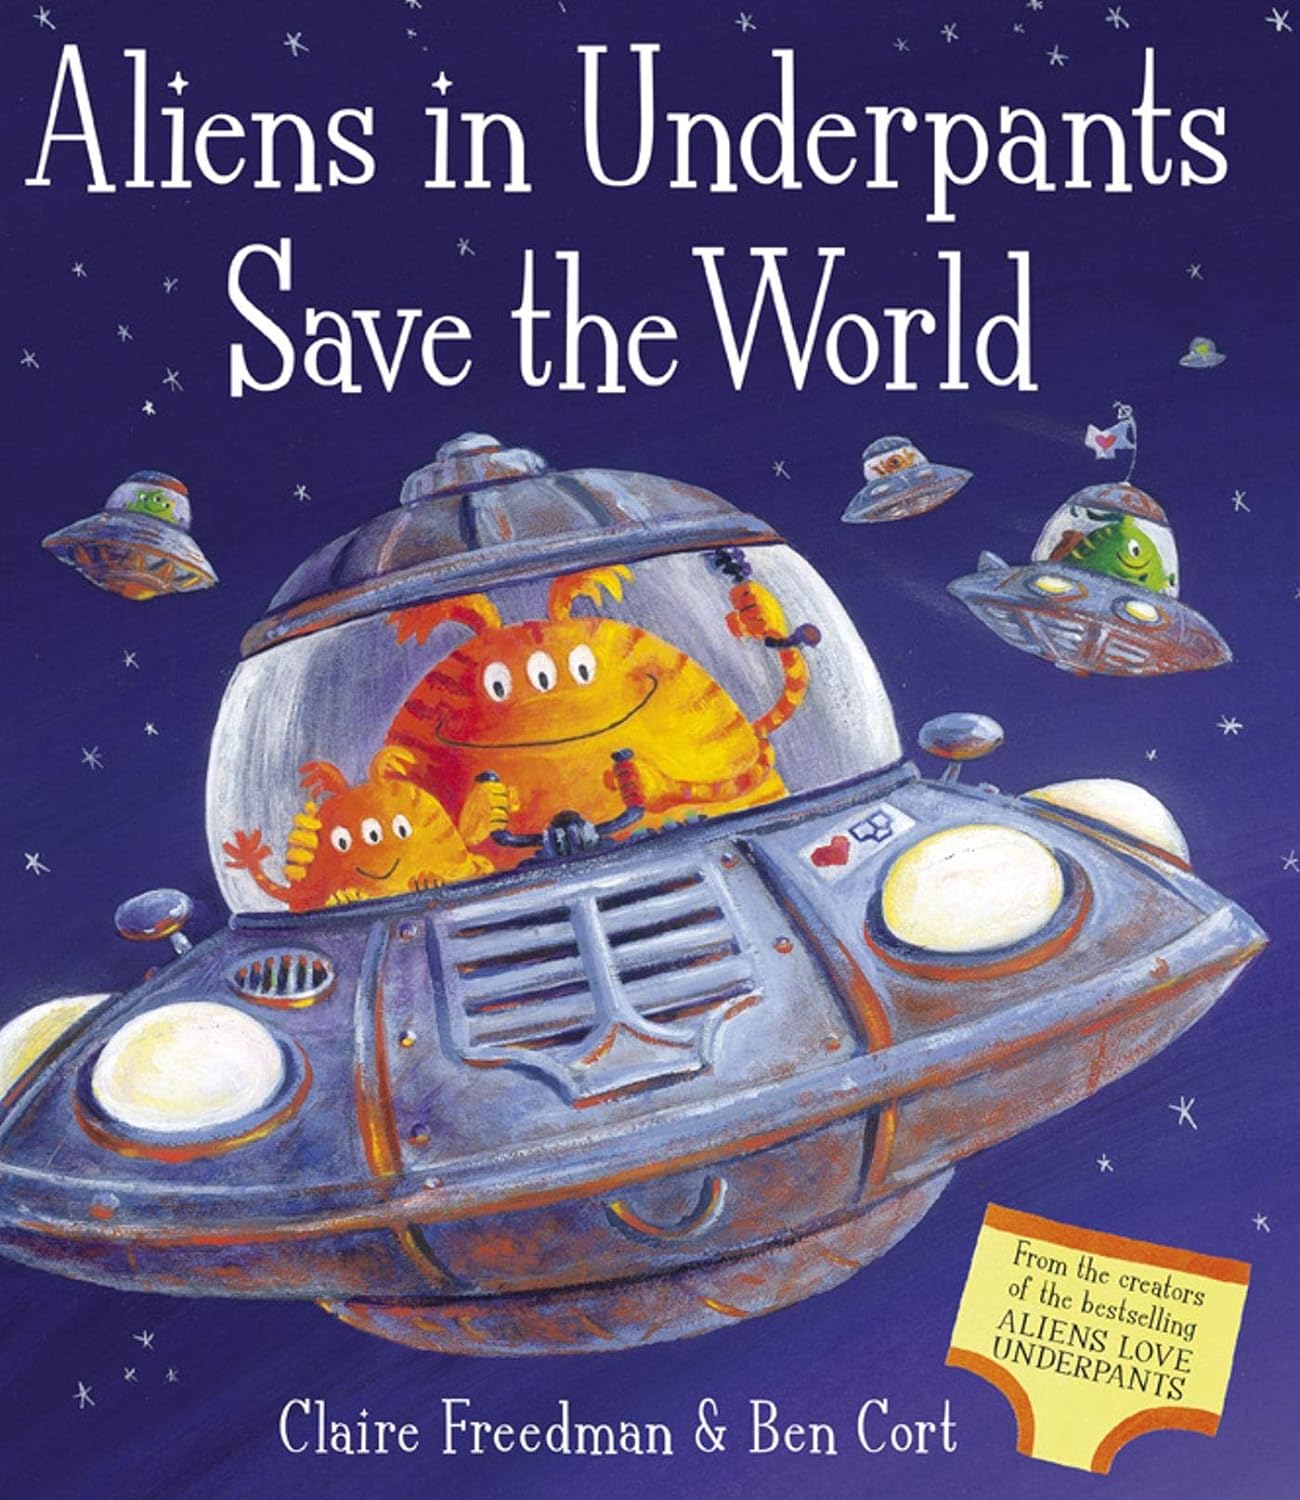 Children's Books - Aliens in Underpants Save the World